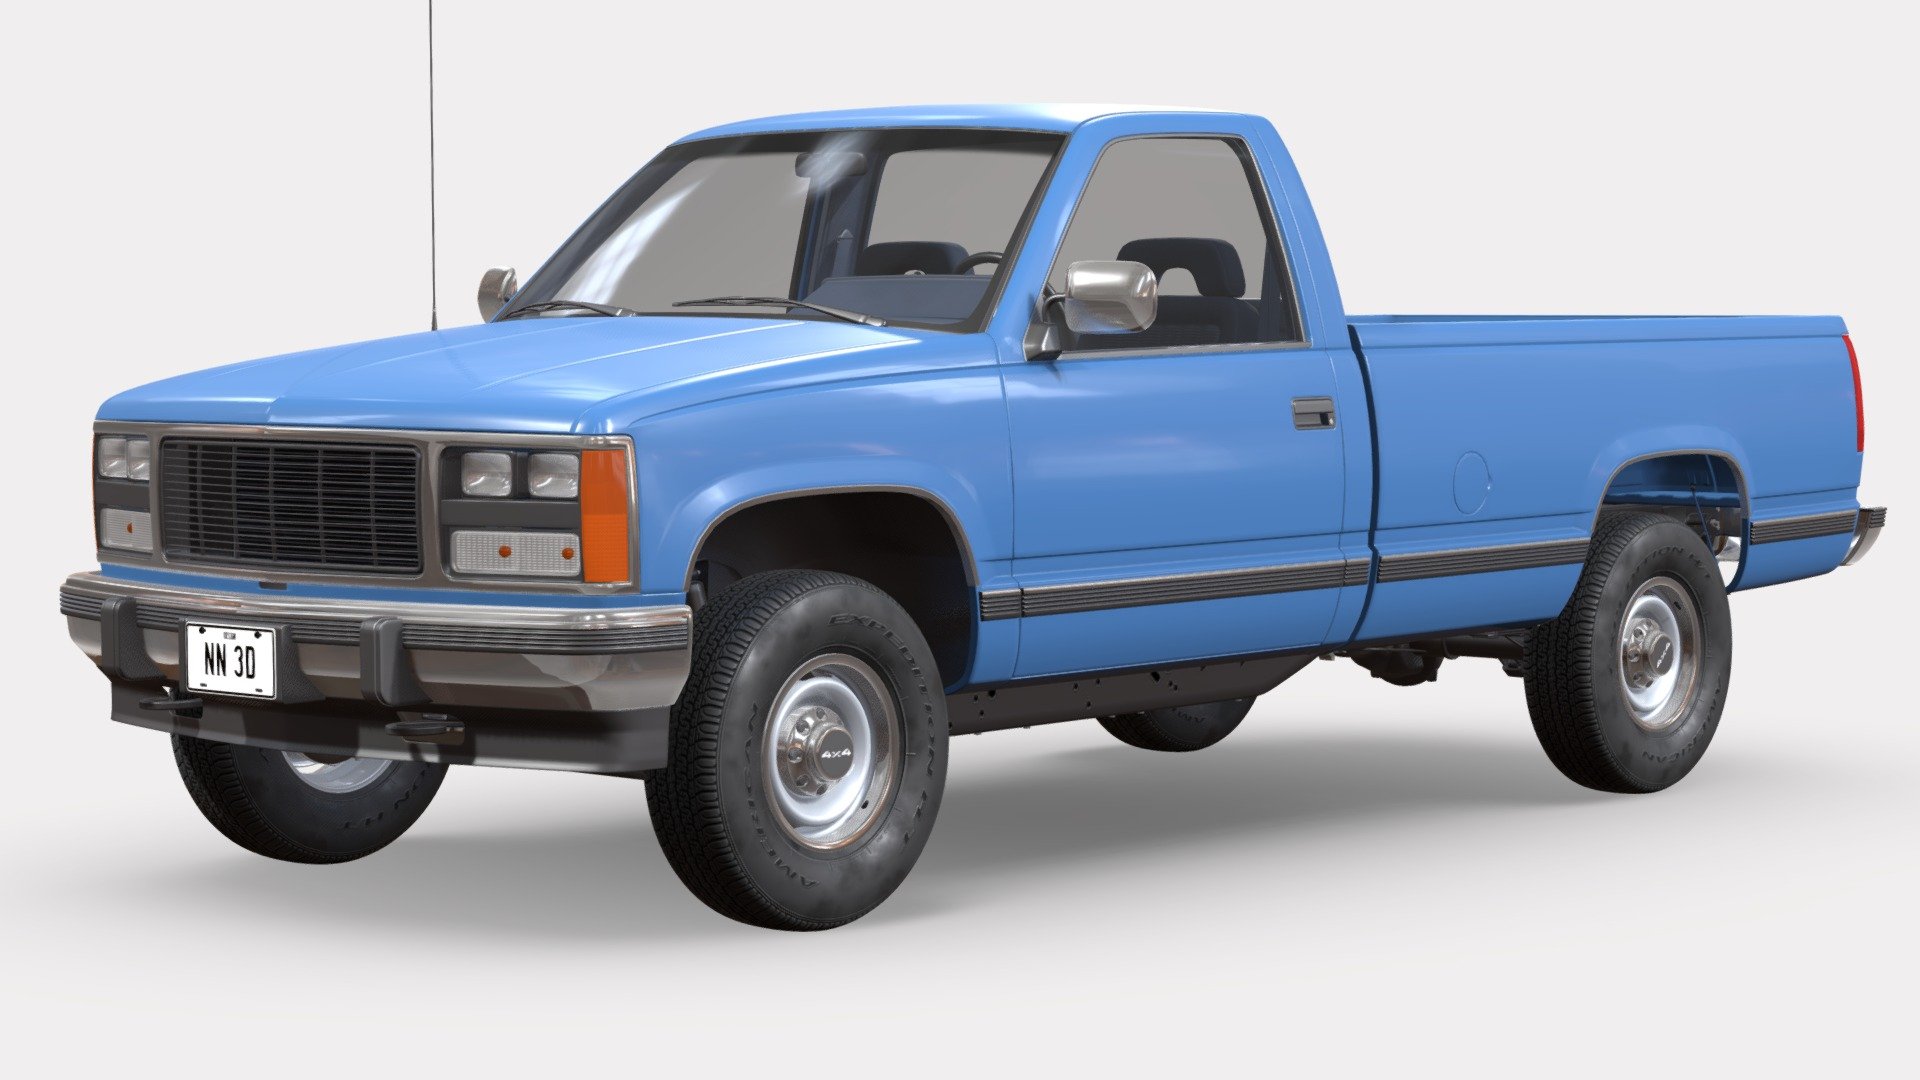 NN 3D store.

3D model of a heavy duty long bed pickup truck.

The truck's high detail exterior and interior are great for close up renders and the undercarriage has enough visible parts for close range shots.

The model was created with 3DS Max 2016 using the open subdivision modifier which has been left in the stack to adjust the level of detail.

There are also included HI and LO poly versions in Blender format with textures.

Exchange files included: FBX and OBJ with HI and LO poly versions, 3DS only with LO poly version.

SPECIFICATIONS:

The model has 164.000 polygons with subdivision level at 0 and 657.000 at level 1.

All textures are included and mapped in all files but they will render like the preview images only in 3DSMax and Blender versions with V-Ray and Cycles respectively, the rest of the files might have to be adjusted depending on the software you are using.

Textures are in PNG and JPG format with 4096x4096, 2048x2048 and 1024x1024 resolution 3d model